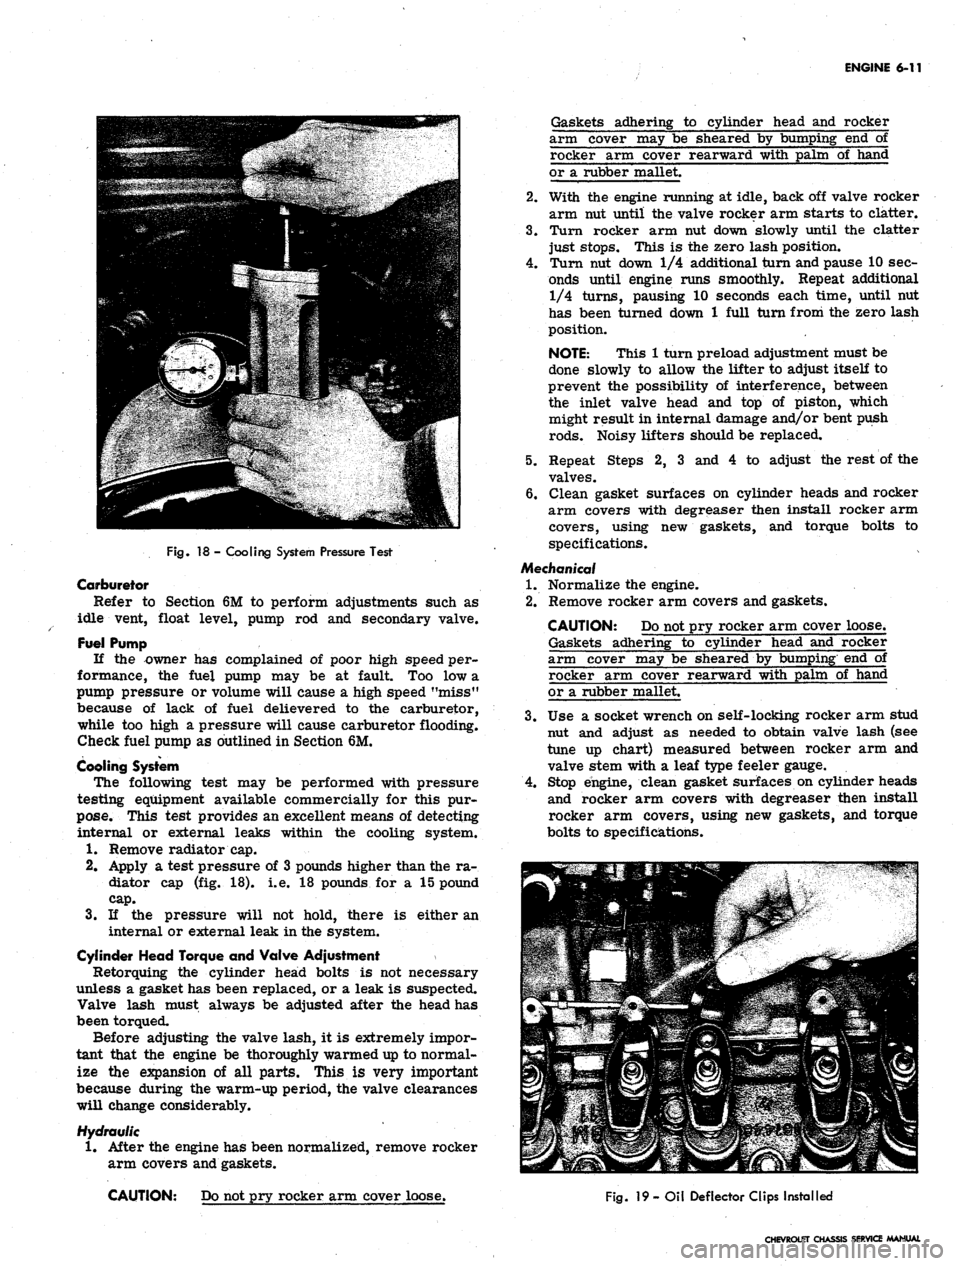 CHEVROLET CAMARO 1967 1.G Chassis Workshop Manual 
ENGINE 6-11

Fig.
 18 - Cooling System Pressure Test

Carburetor

Refer to Section 6M to perform adjustments such as

idle vent, float level, pump rod and secondary valve.

Fuel Pump

If the owner ha